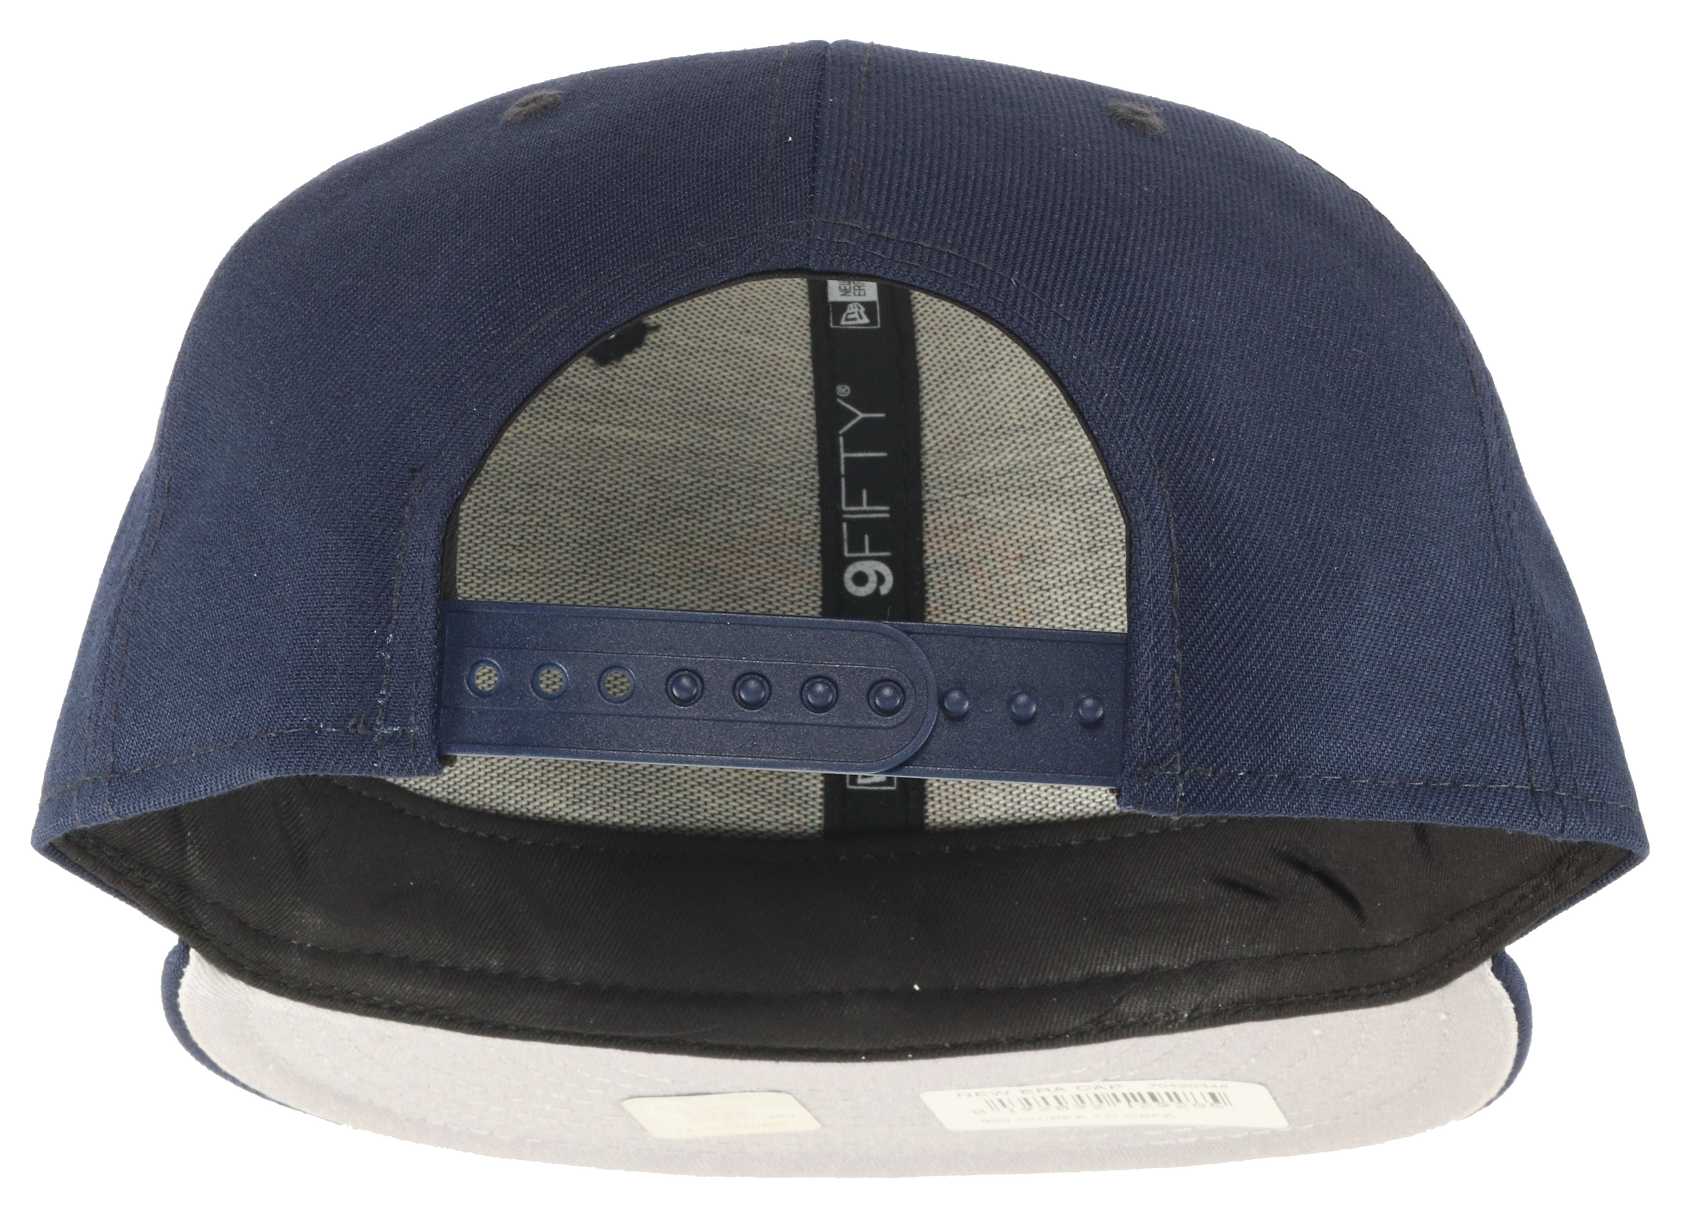 Chicago Bears First Colour Base 9Fifty Snapback Cap New Era